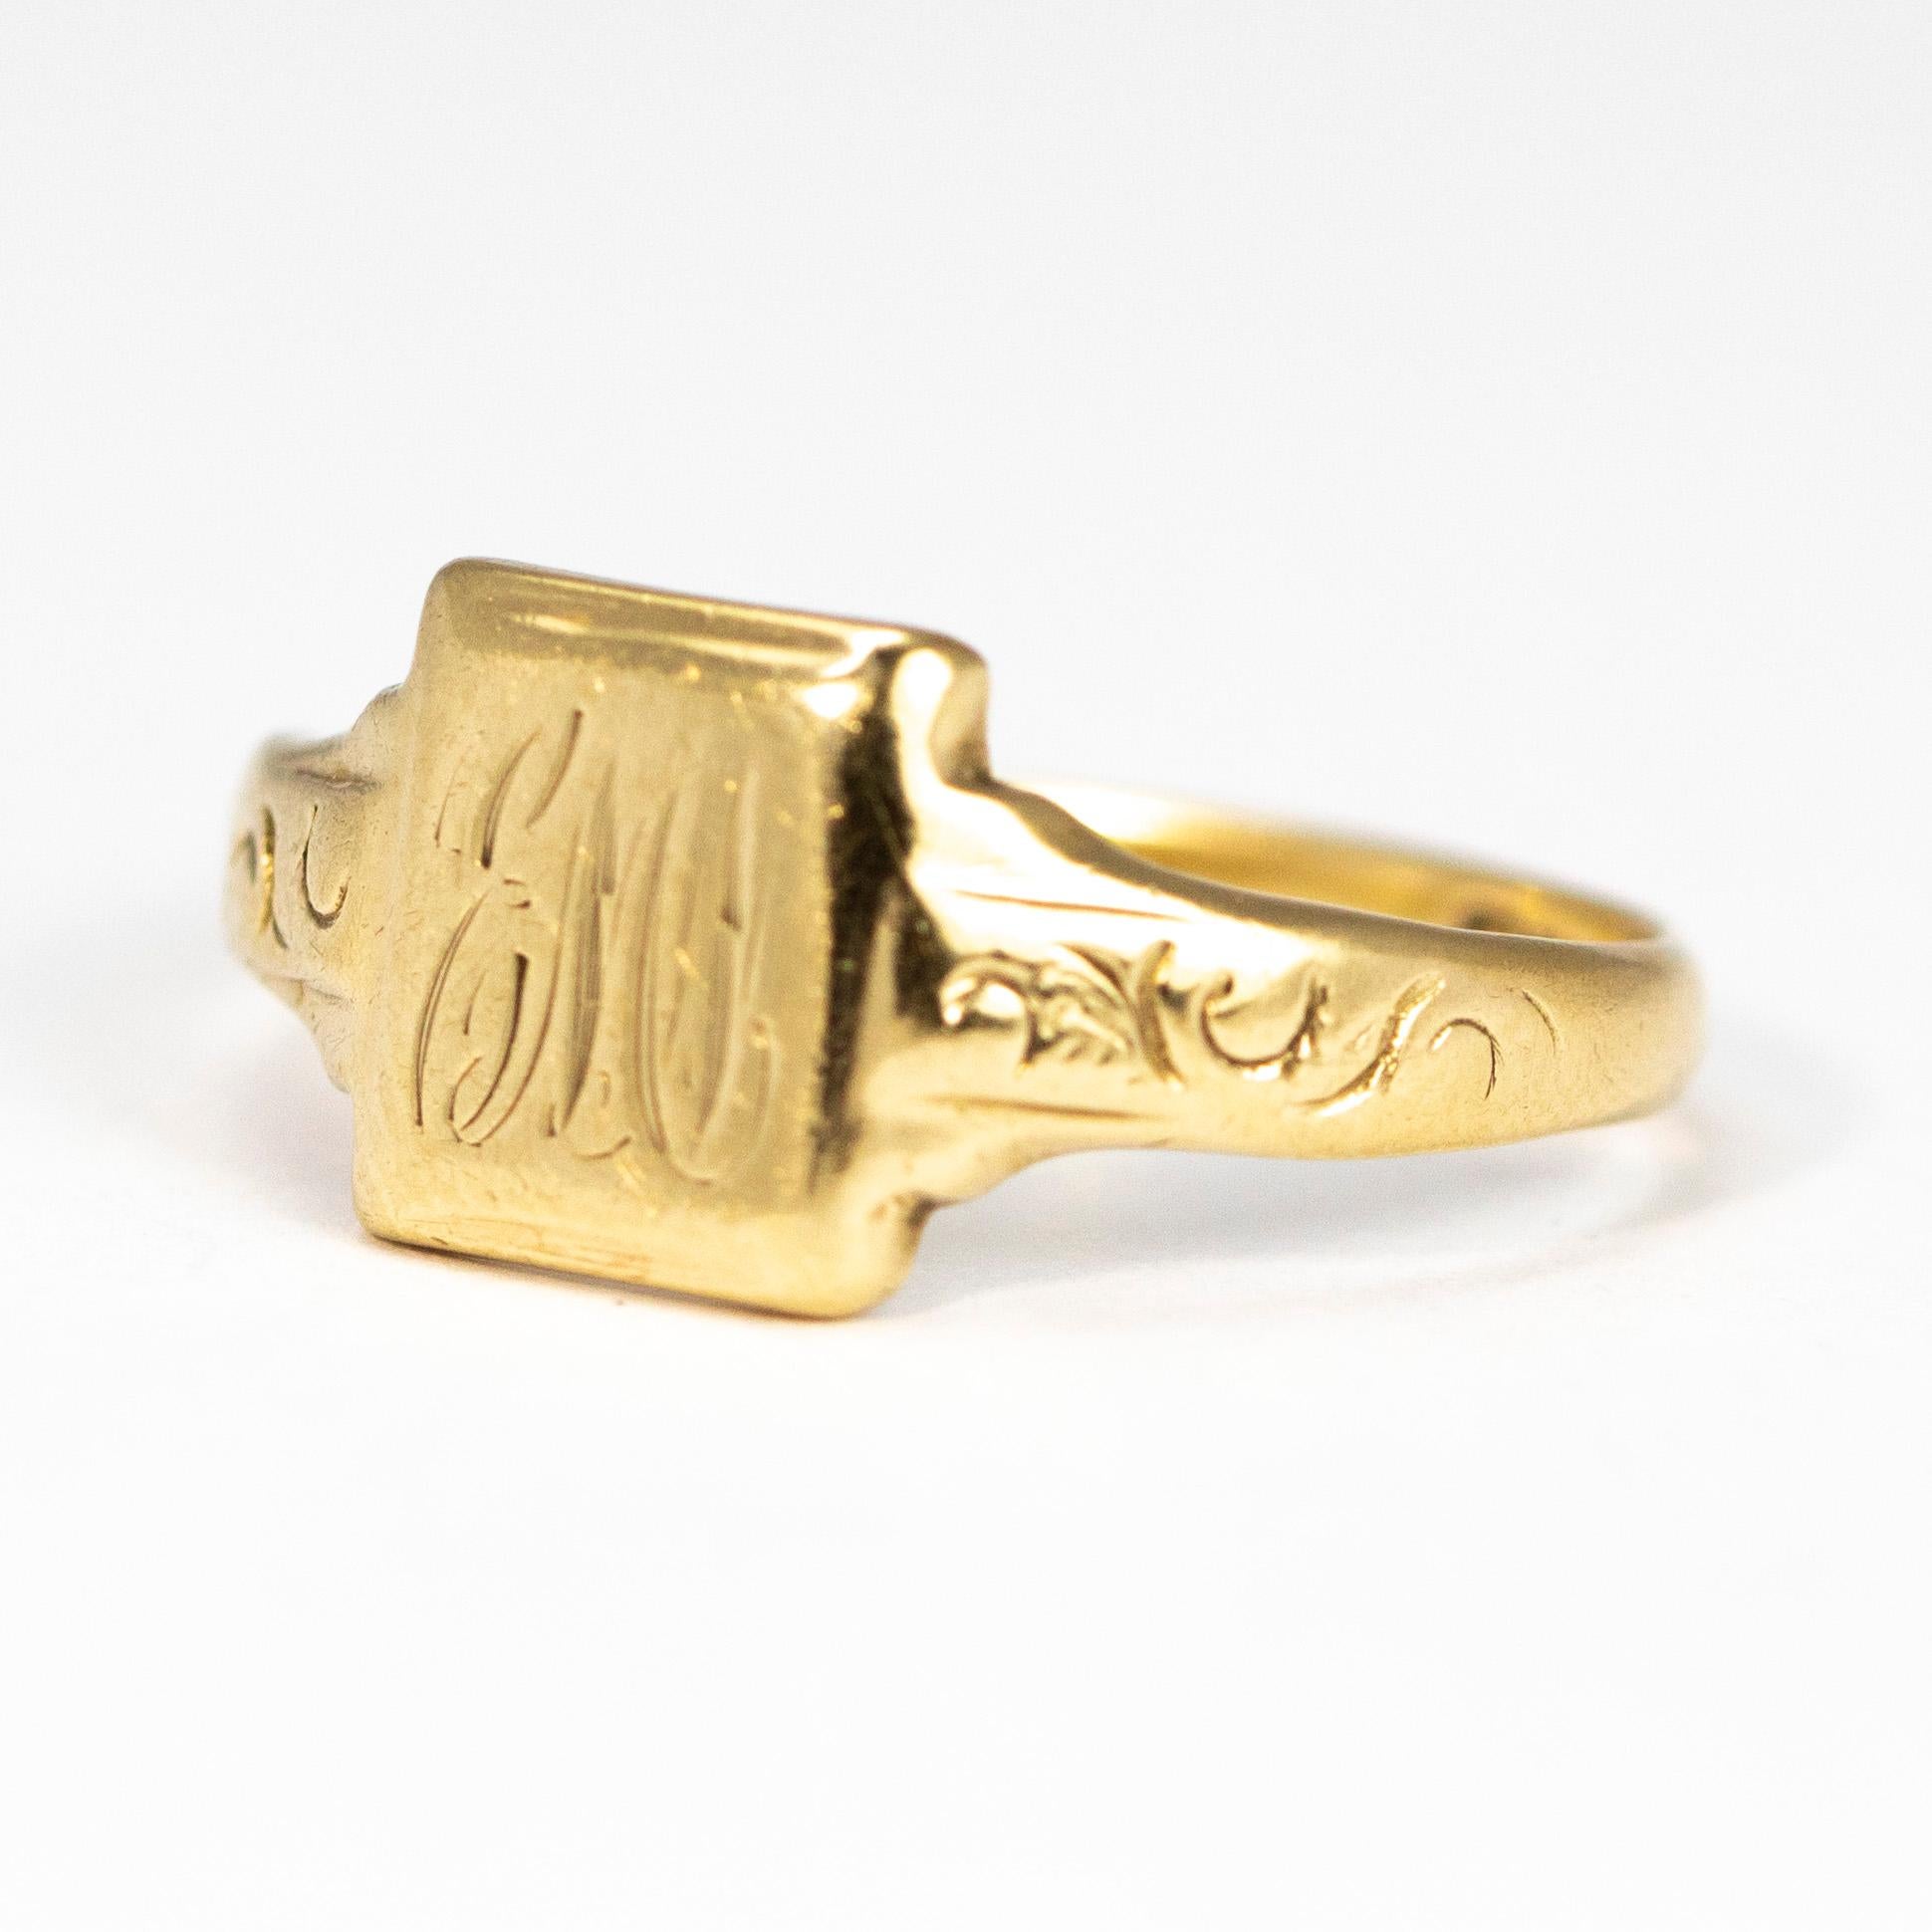 This signet ring has initials which we believe read E.M.J. The ring is modelled in 9ct gold and has lovely detailed shoulders. 

Ring Size: N or 6 3/4
Fave Dimensions: 9 x 8mm

Weight: 2.46g
